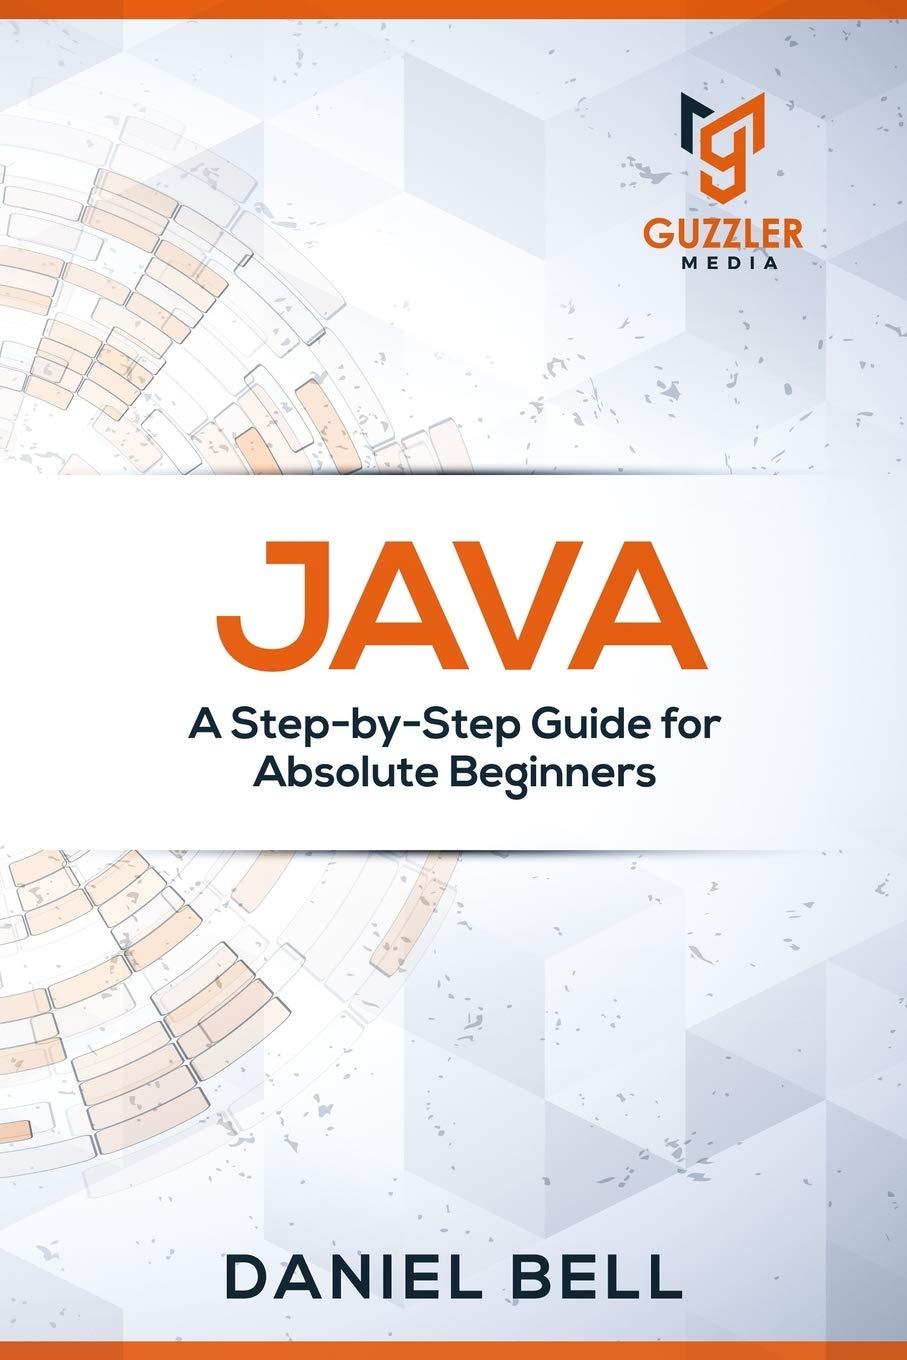 java a step-by-step guide for absolute beginners 1st edition daniel bell 1699261695, 978-1699261699